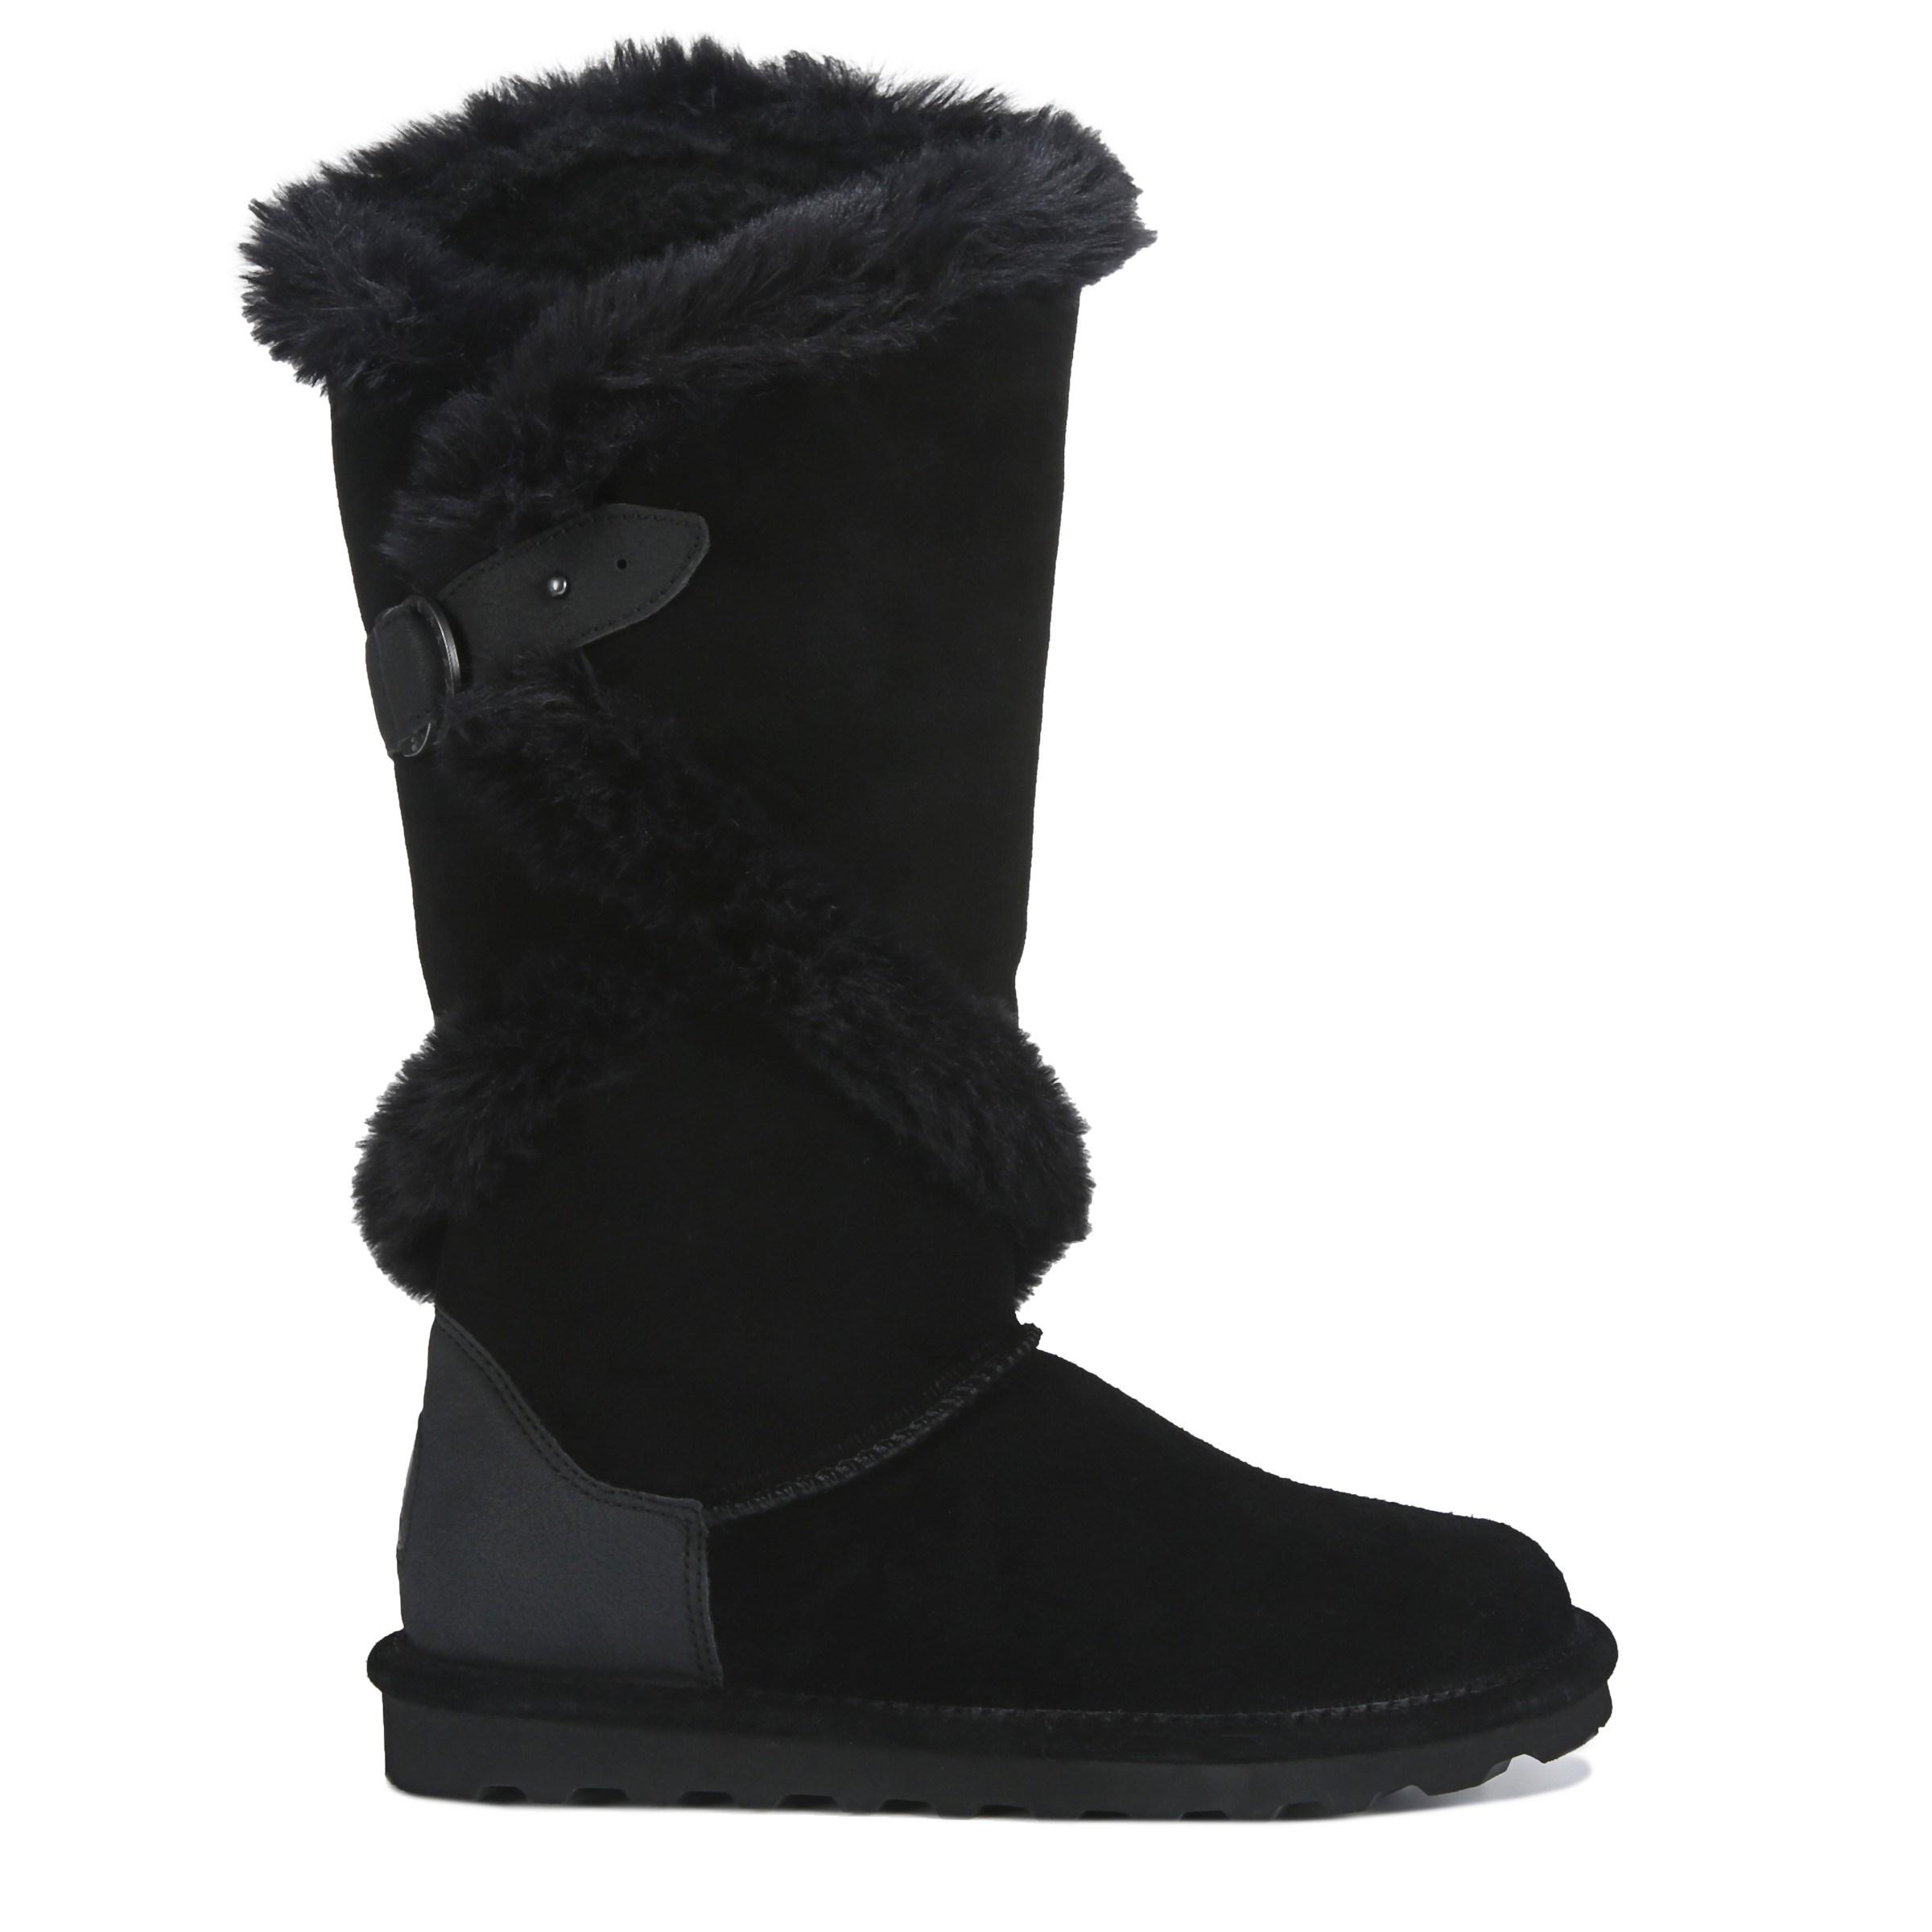 BEARPAW Sheilah Boots in Black ii Cow Suede (Black) - Save 51% - Lyst